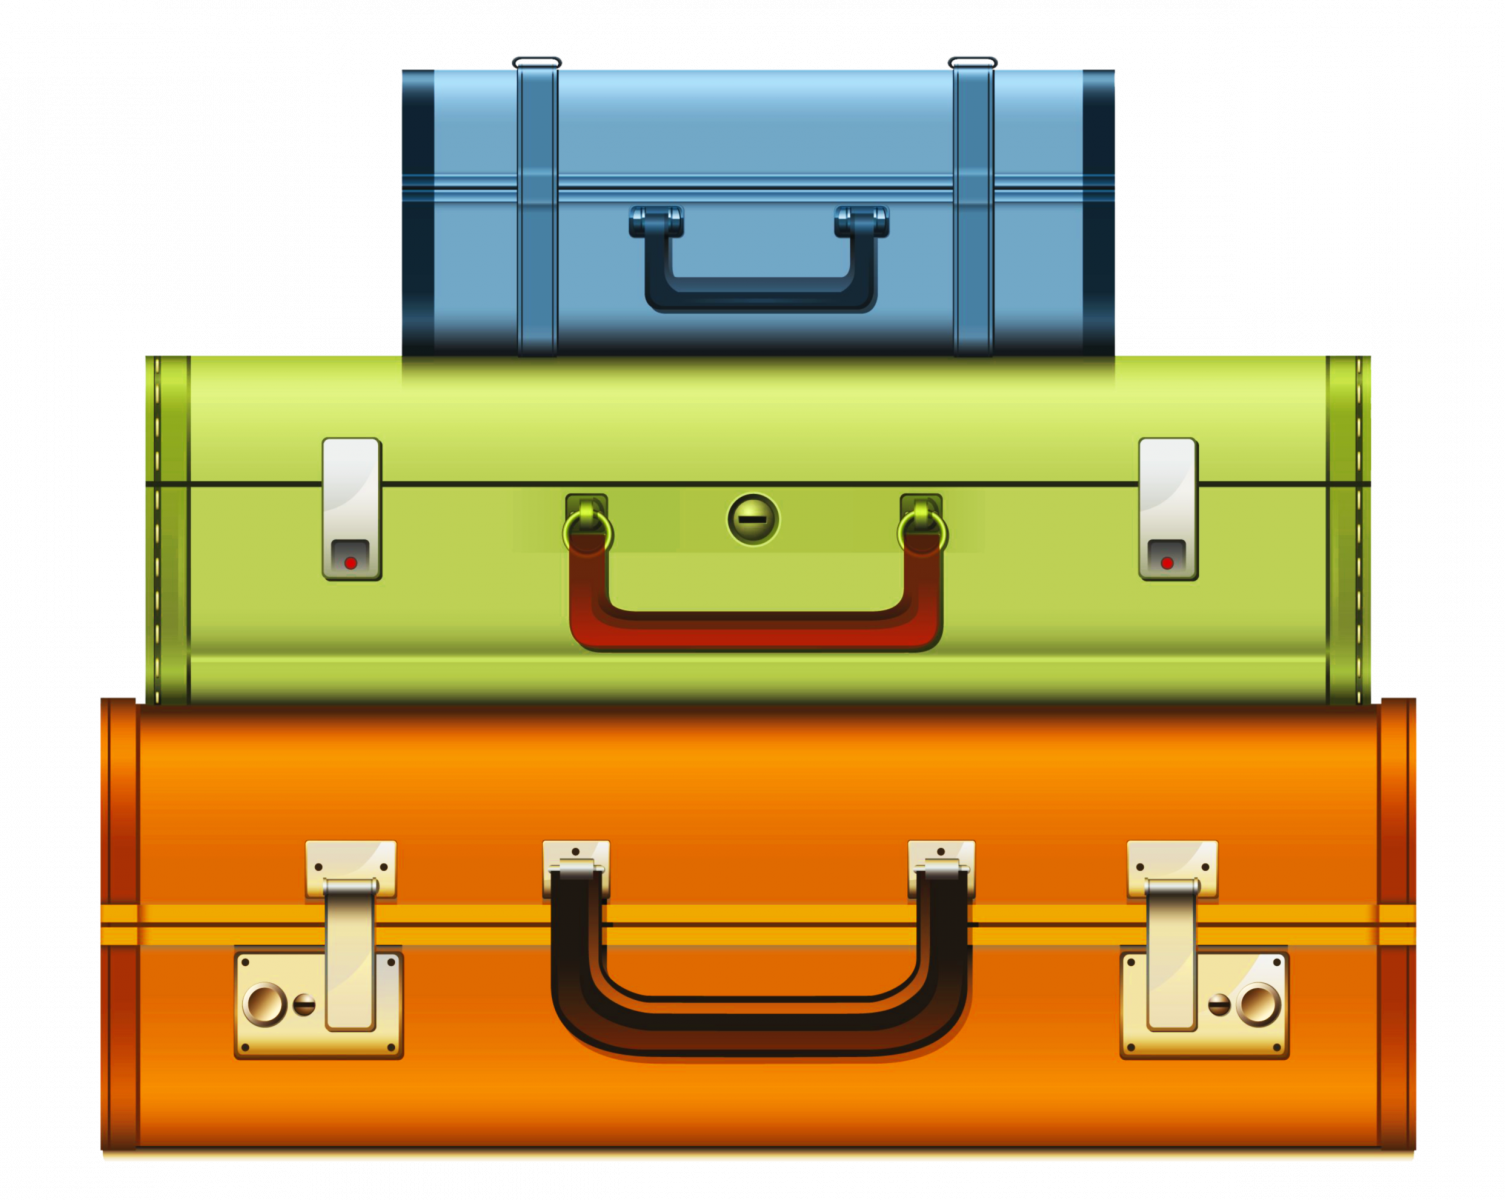 Suitcases - Save Sep 23 - 25 for the Annual Conference